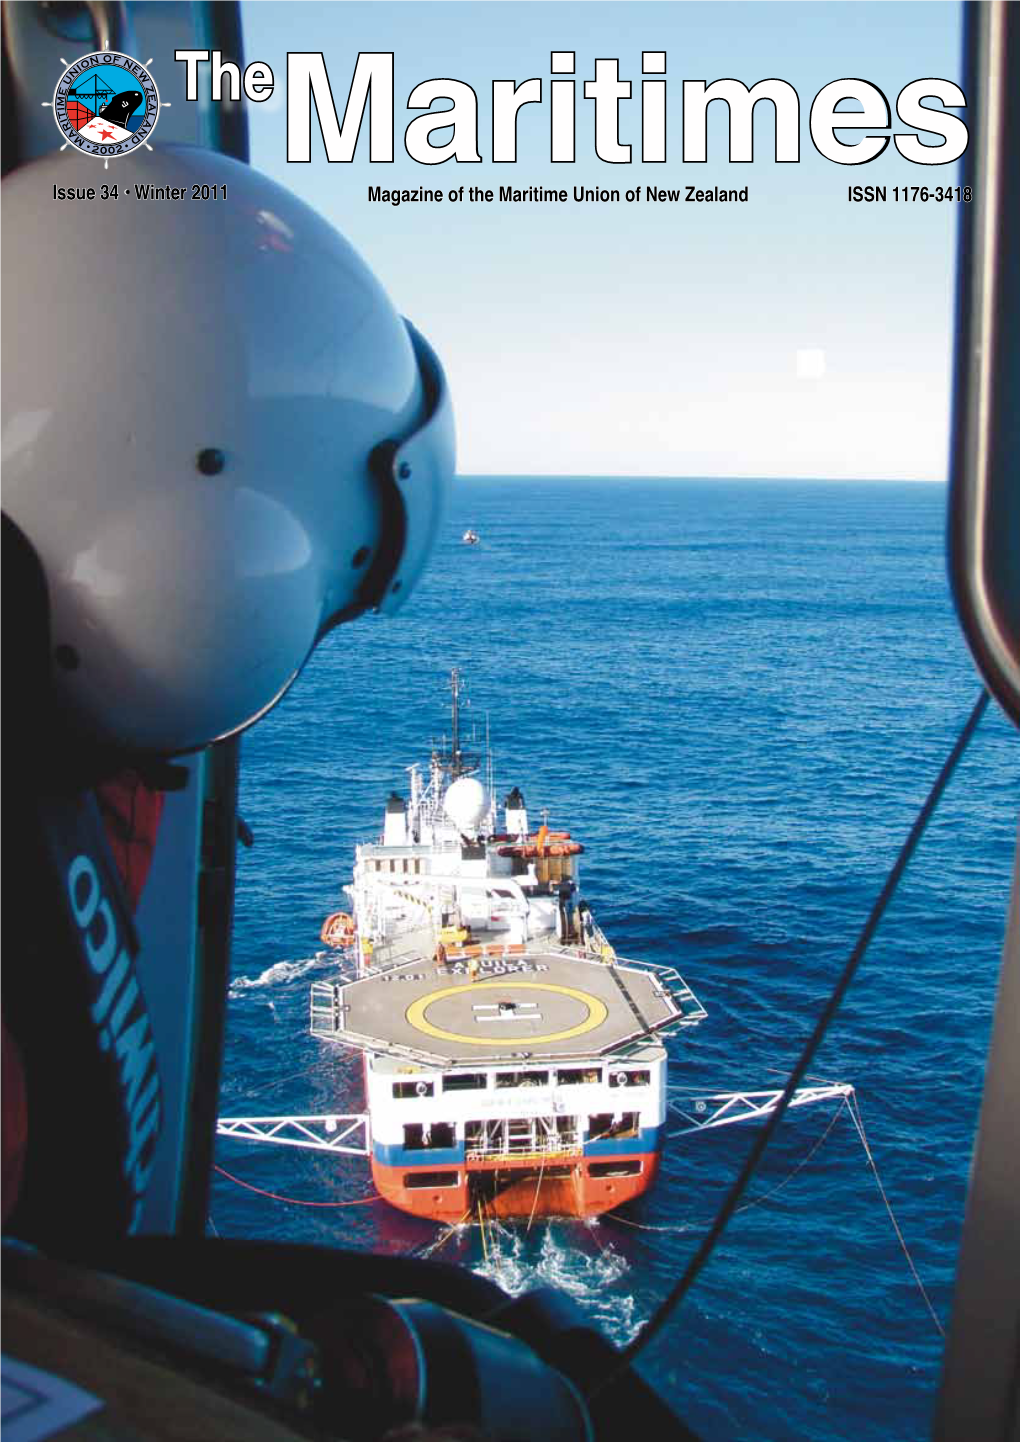 Issue 34 • Winter 2011 Magazine of the Maritime Union of New Zealand